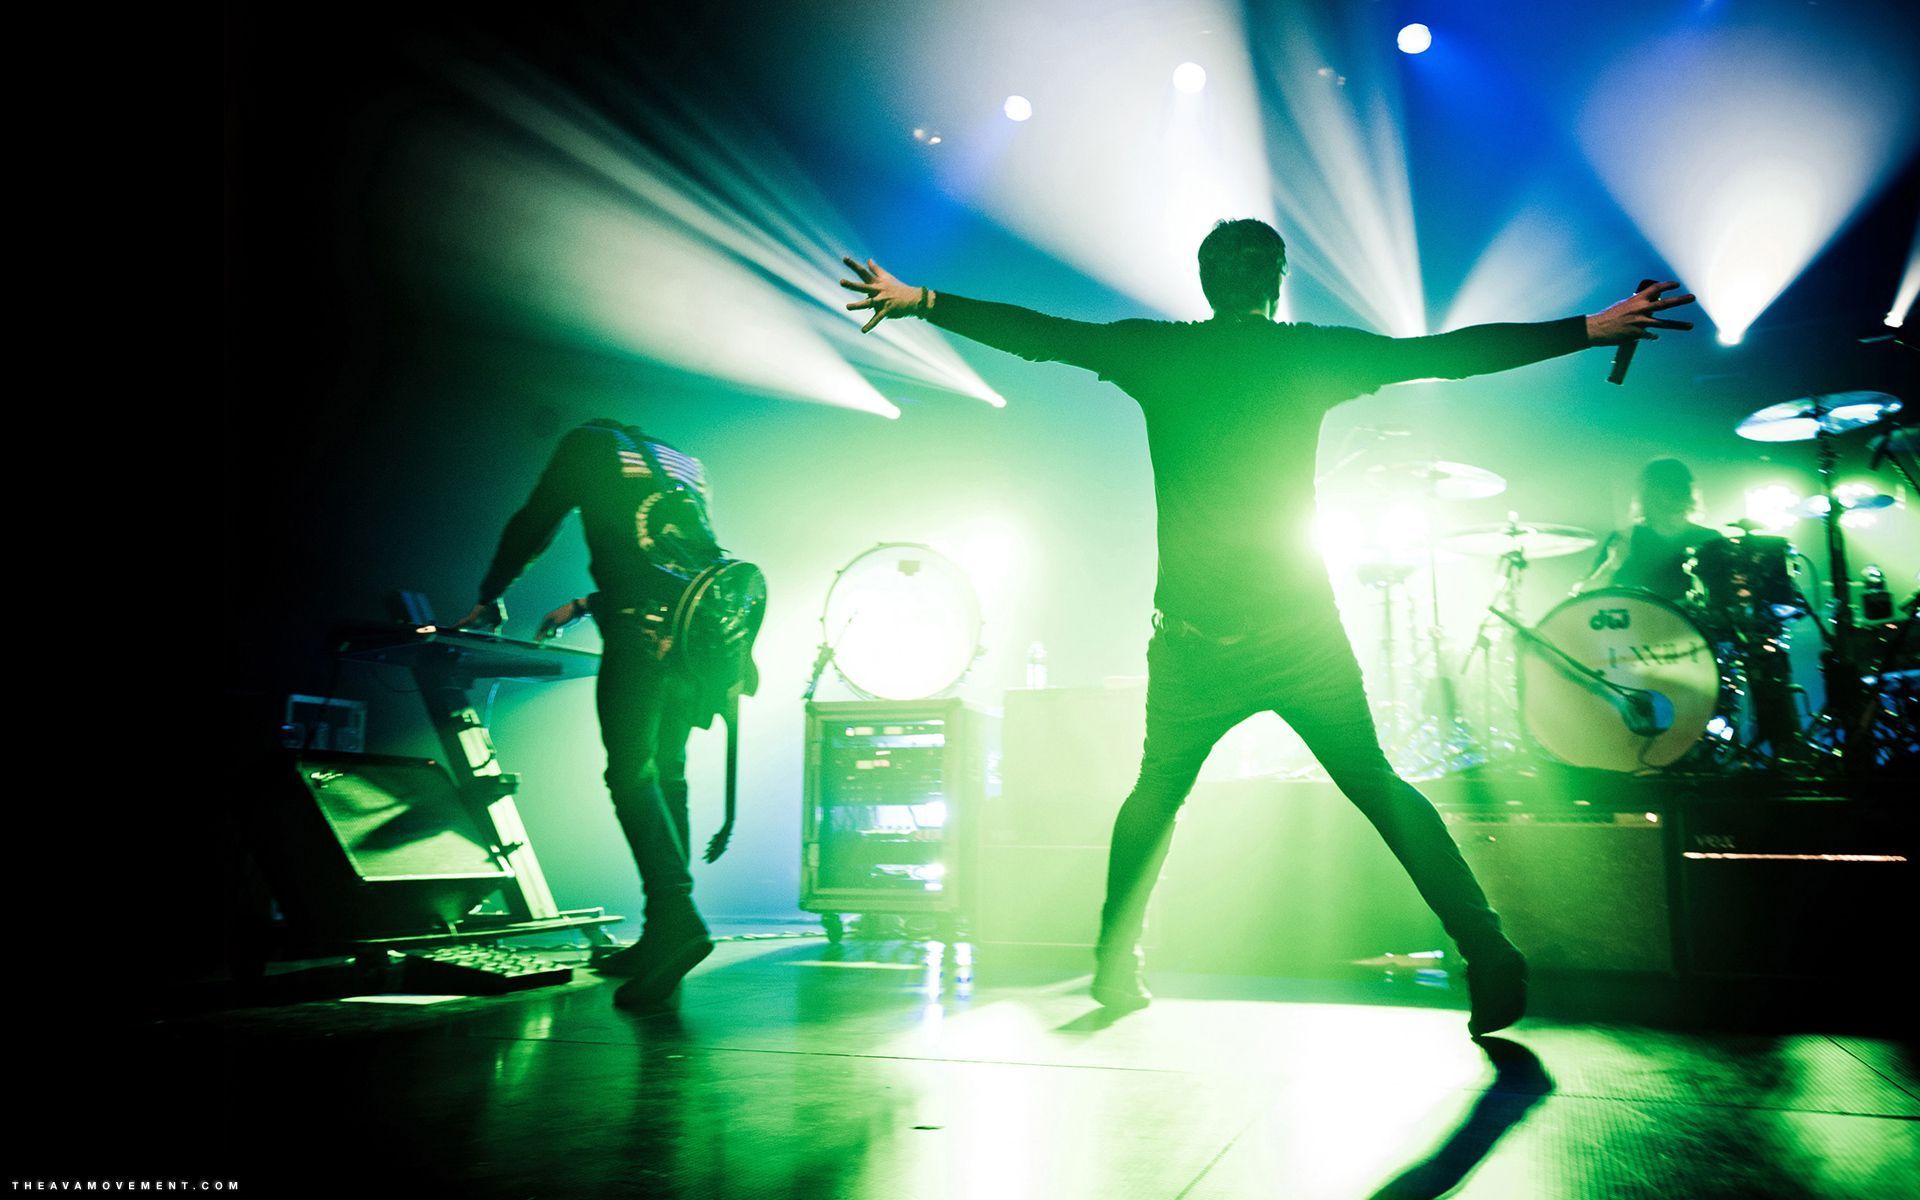 Angels and Airwaves Concert ReviewMy Concert Review